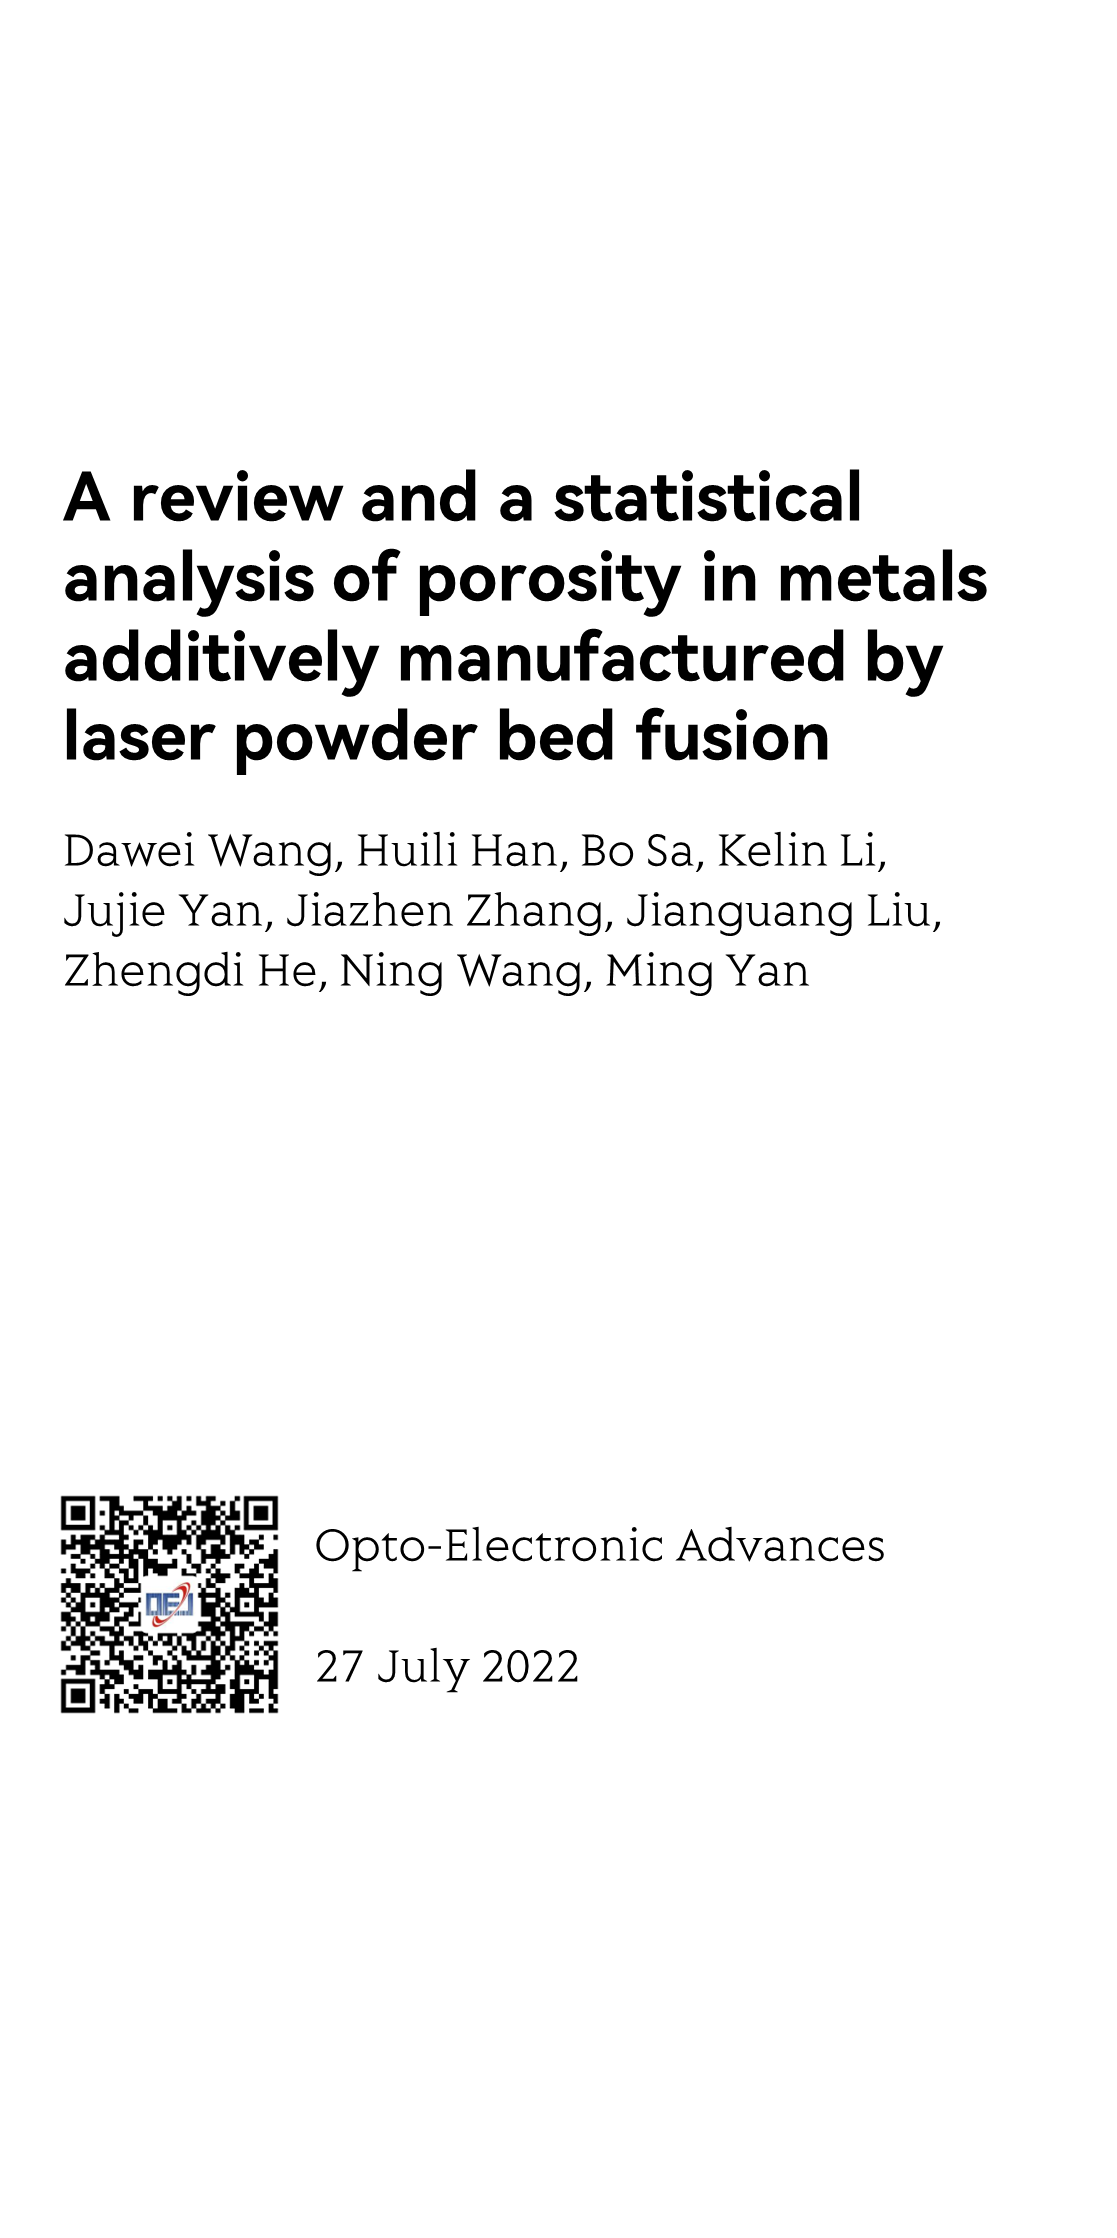 A review and a statistical analysis of porosity in metals additively manufactured by laser powder bed fusion_1